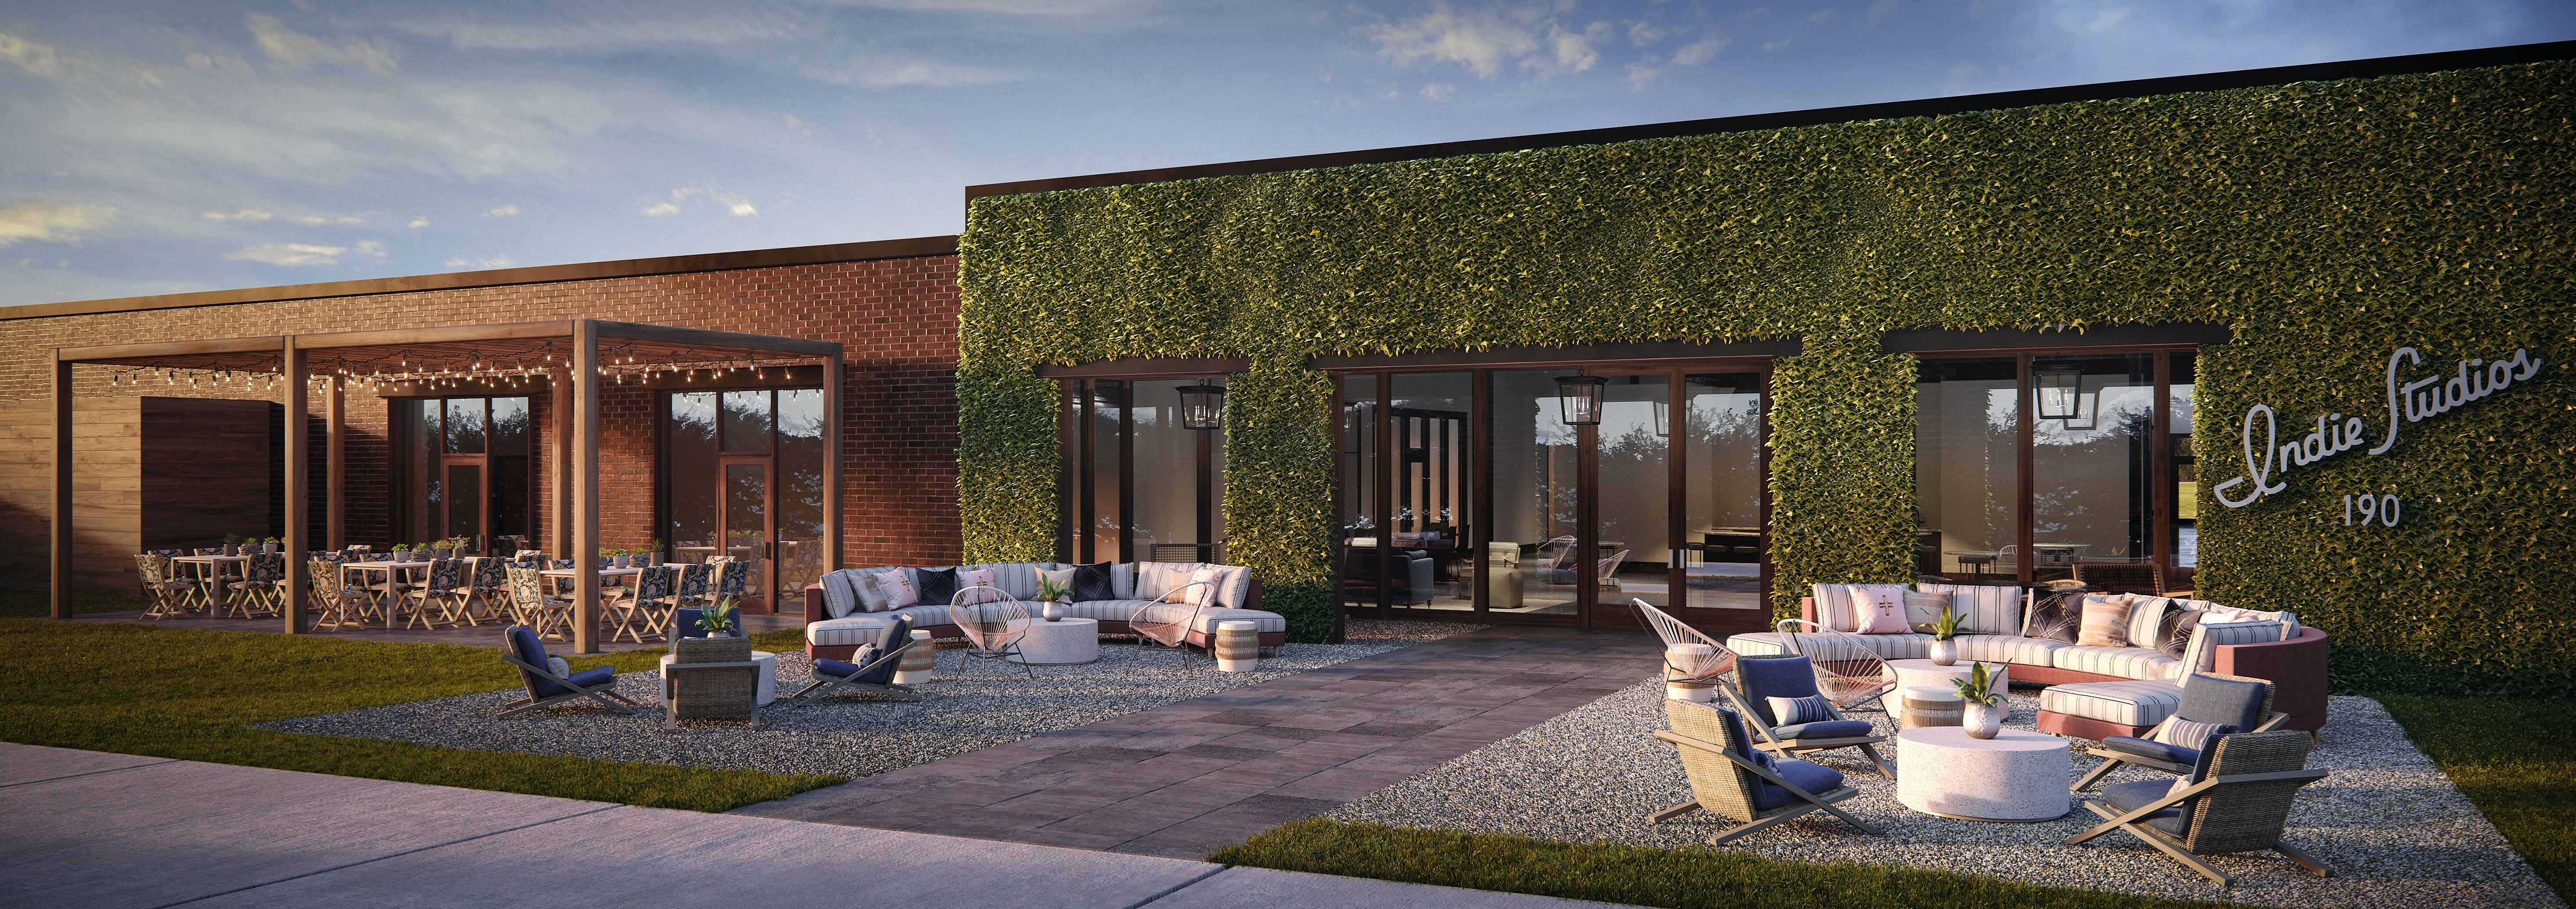 An outdoor patio space with green leafy wall and brick walls, in a rendering.